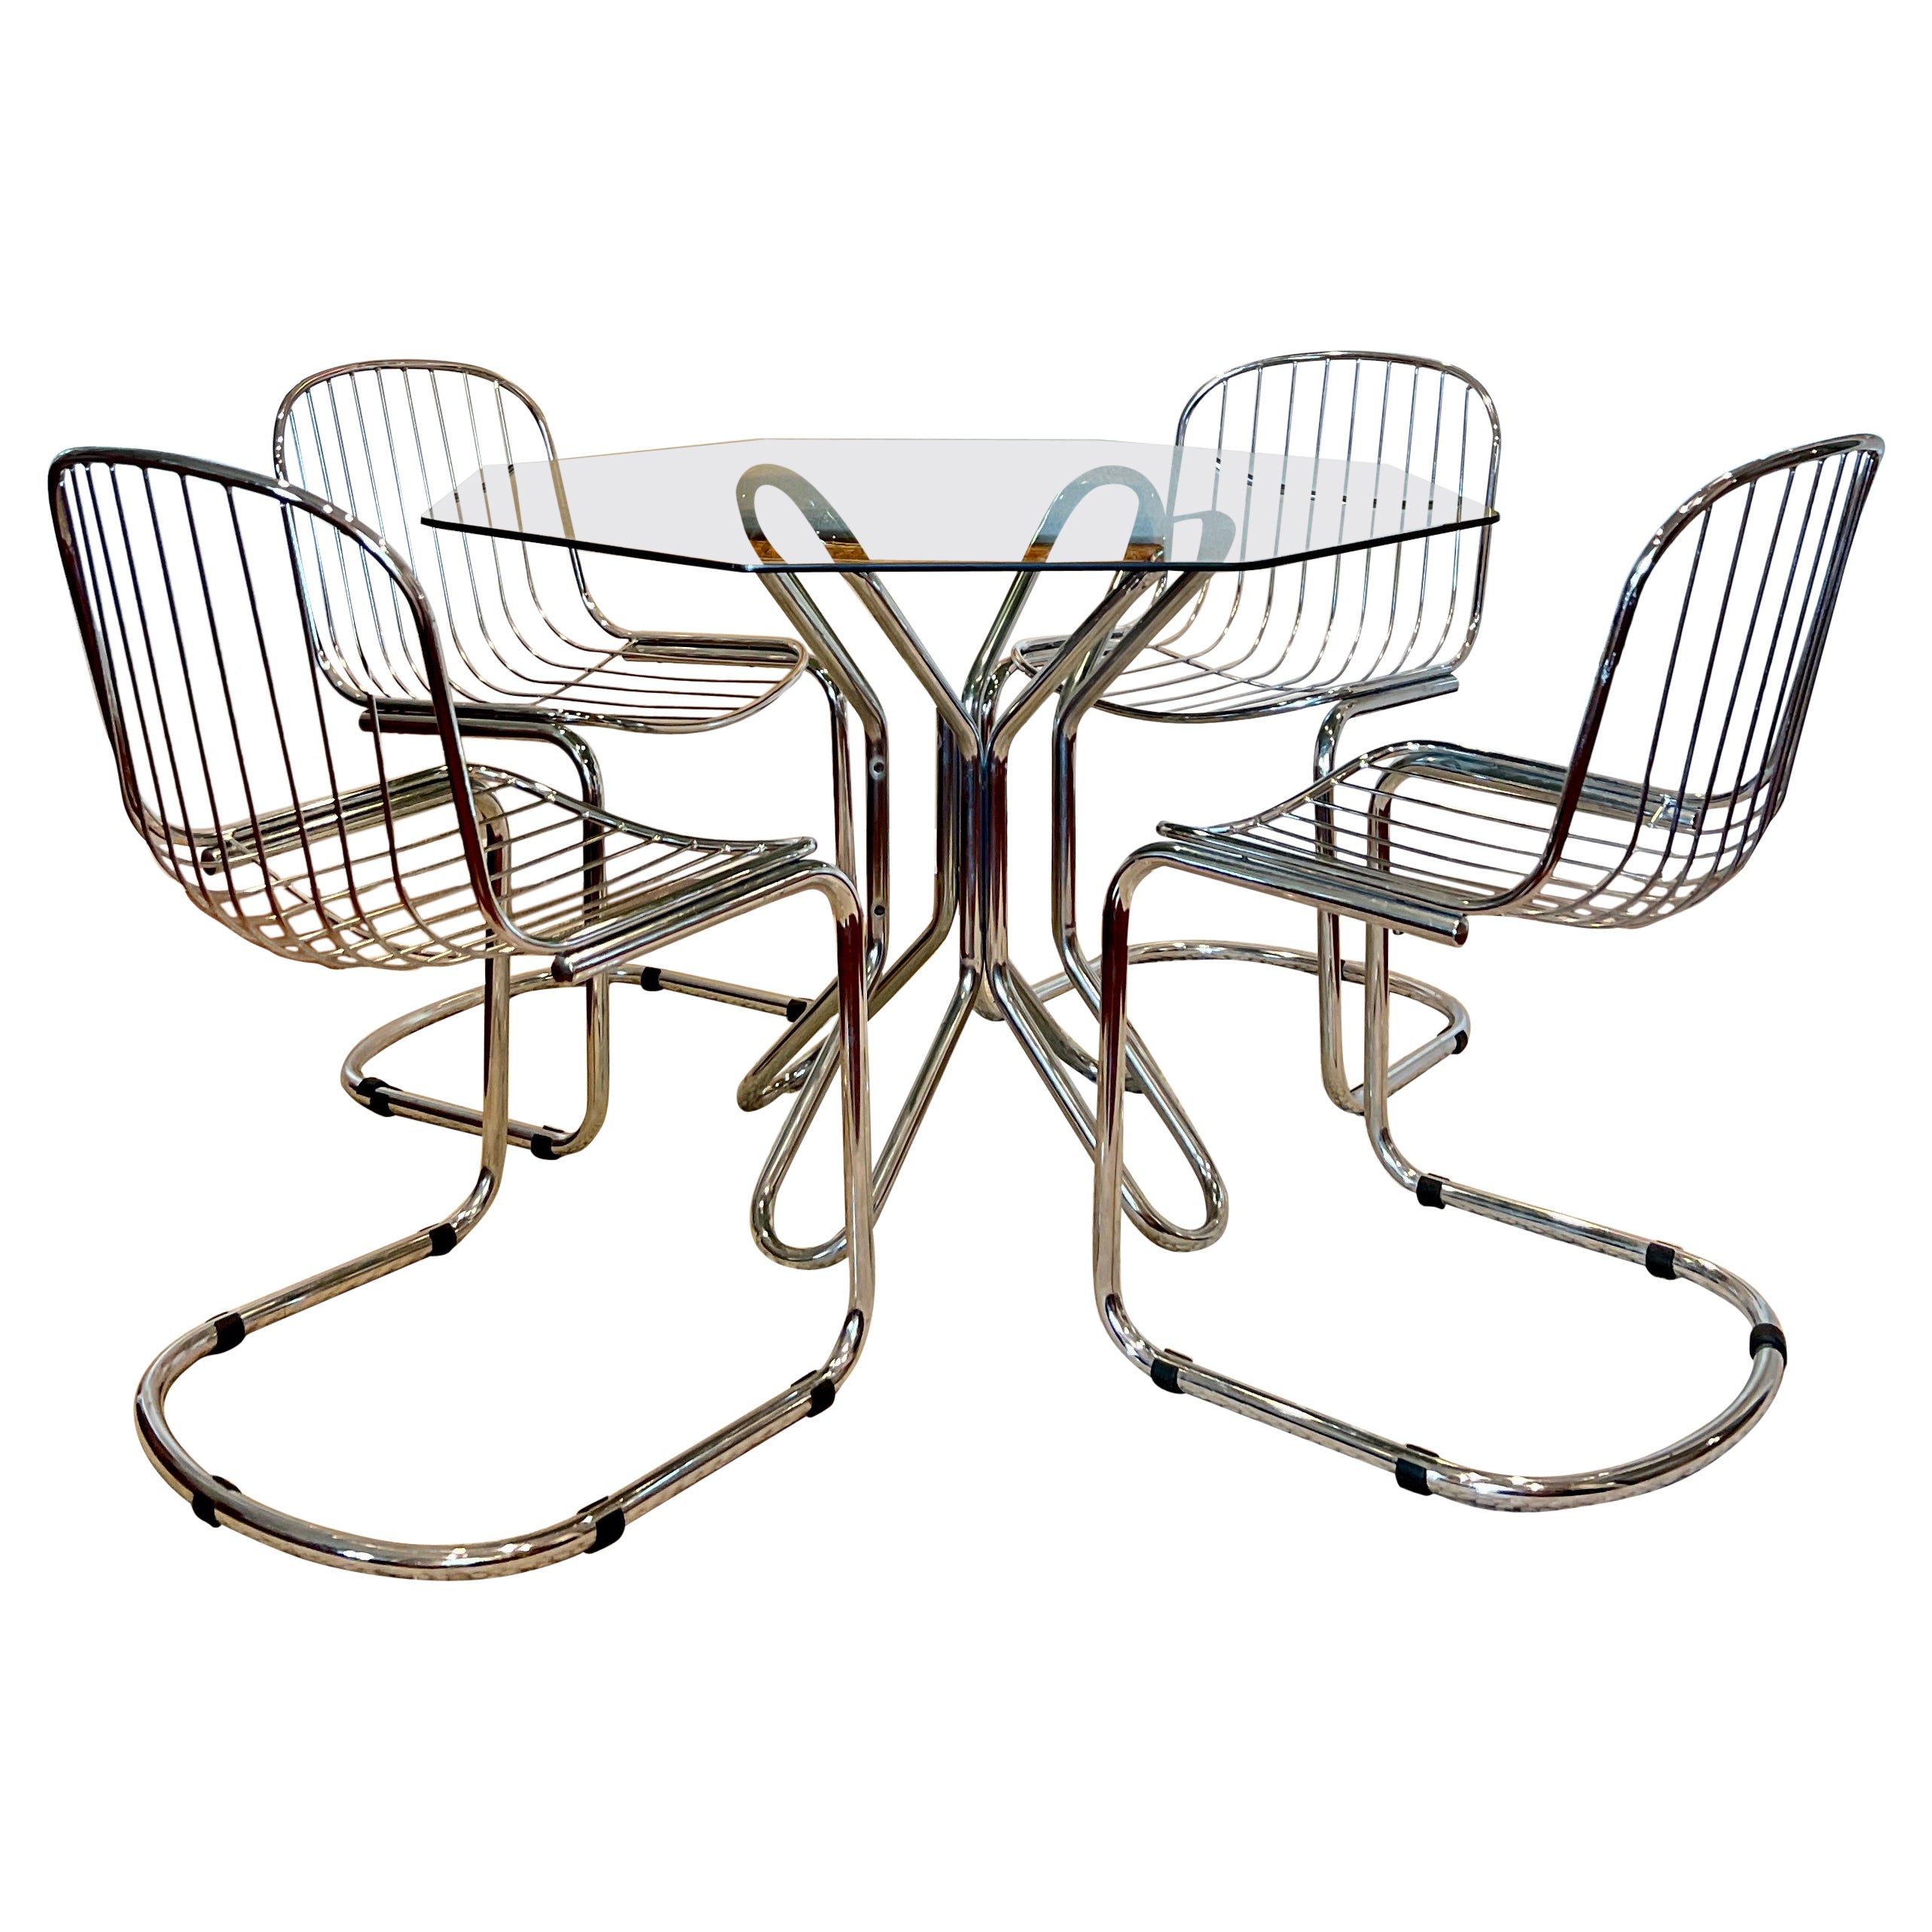 This exceptional vintage Italian dining set is in the style of Gastone Rinaldi and consists of 4 chairs only. The dining table has SOLD.

The chrome is in very good condition with minimal wear. For more comfort, you can place your own pillow of your